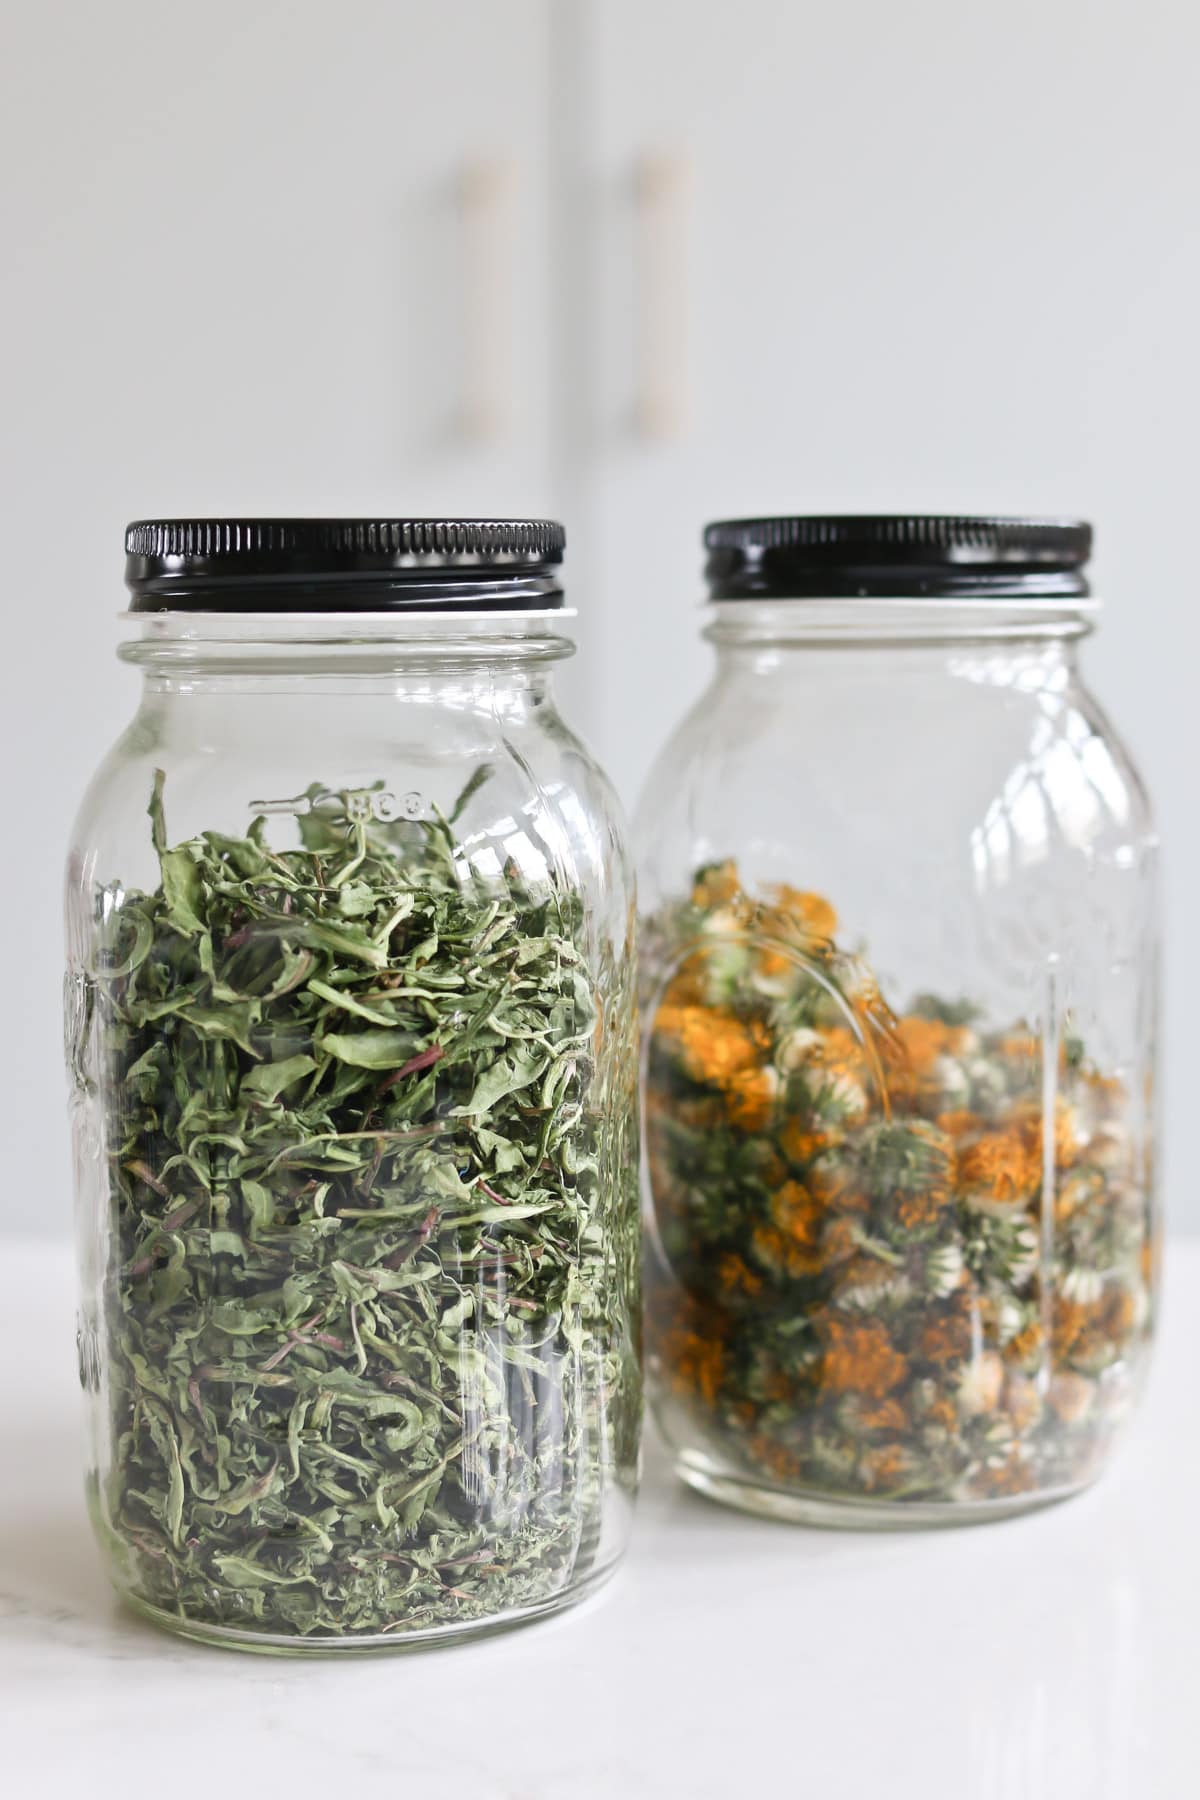 dried dandelion leaves and buds in glass jars